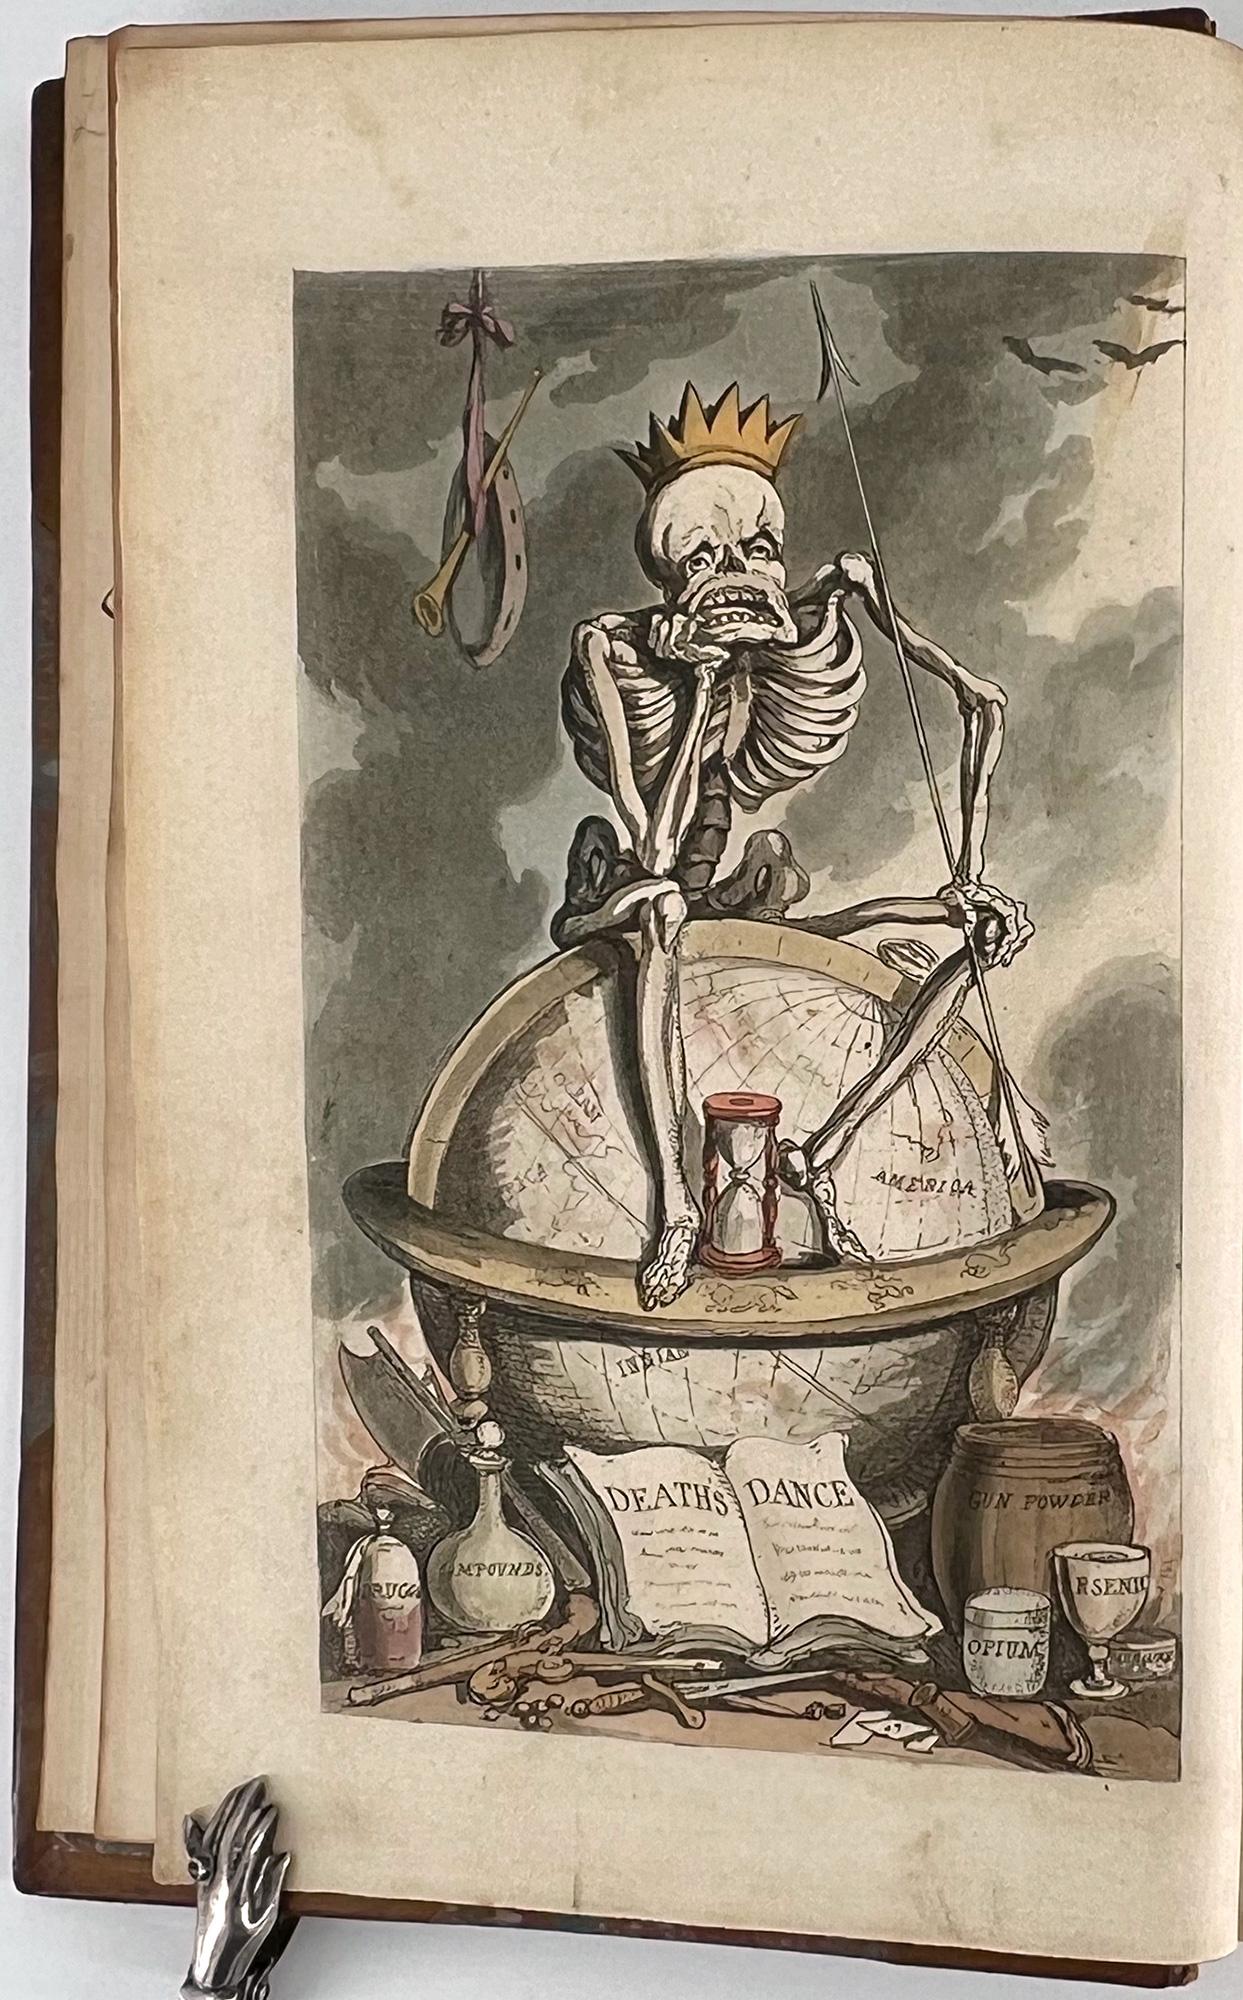 Rowlandson,Thomas & Combe, William
The English Dance of Death; in Twenty-Four Monthly Numbers, from the designs of Thomas Rowlandson accompanied by metrical illustrations by the author of 